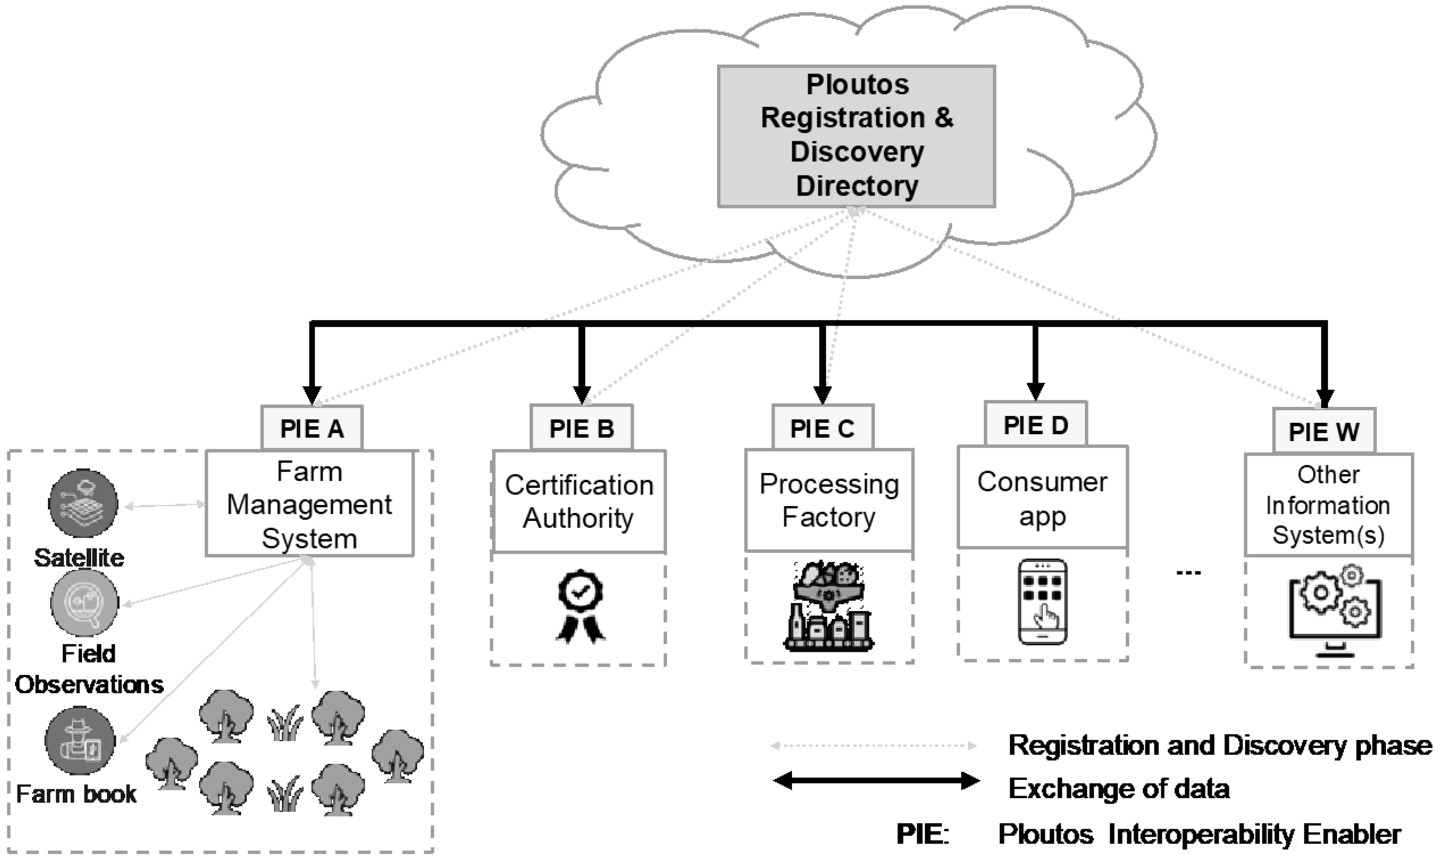 Conceptual view of ploutos data sharing approach.